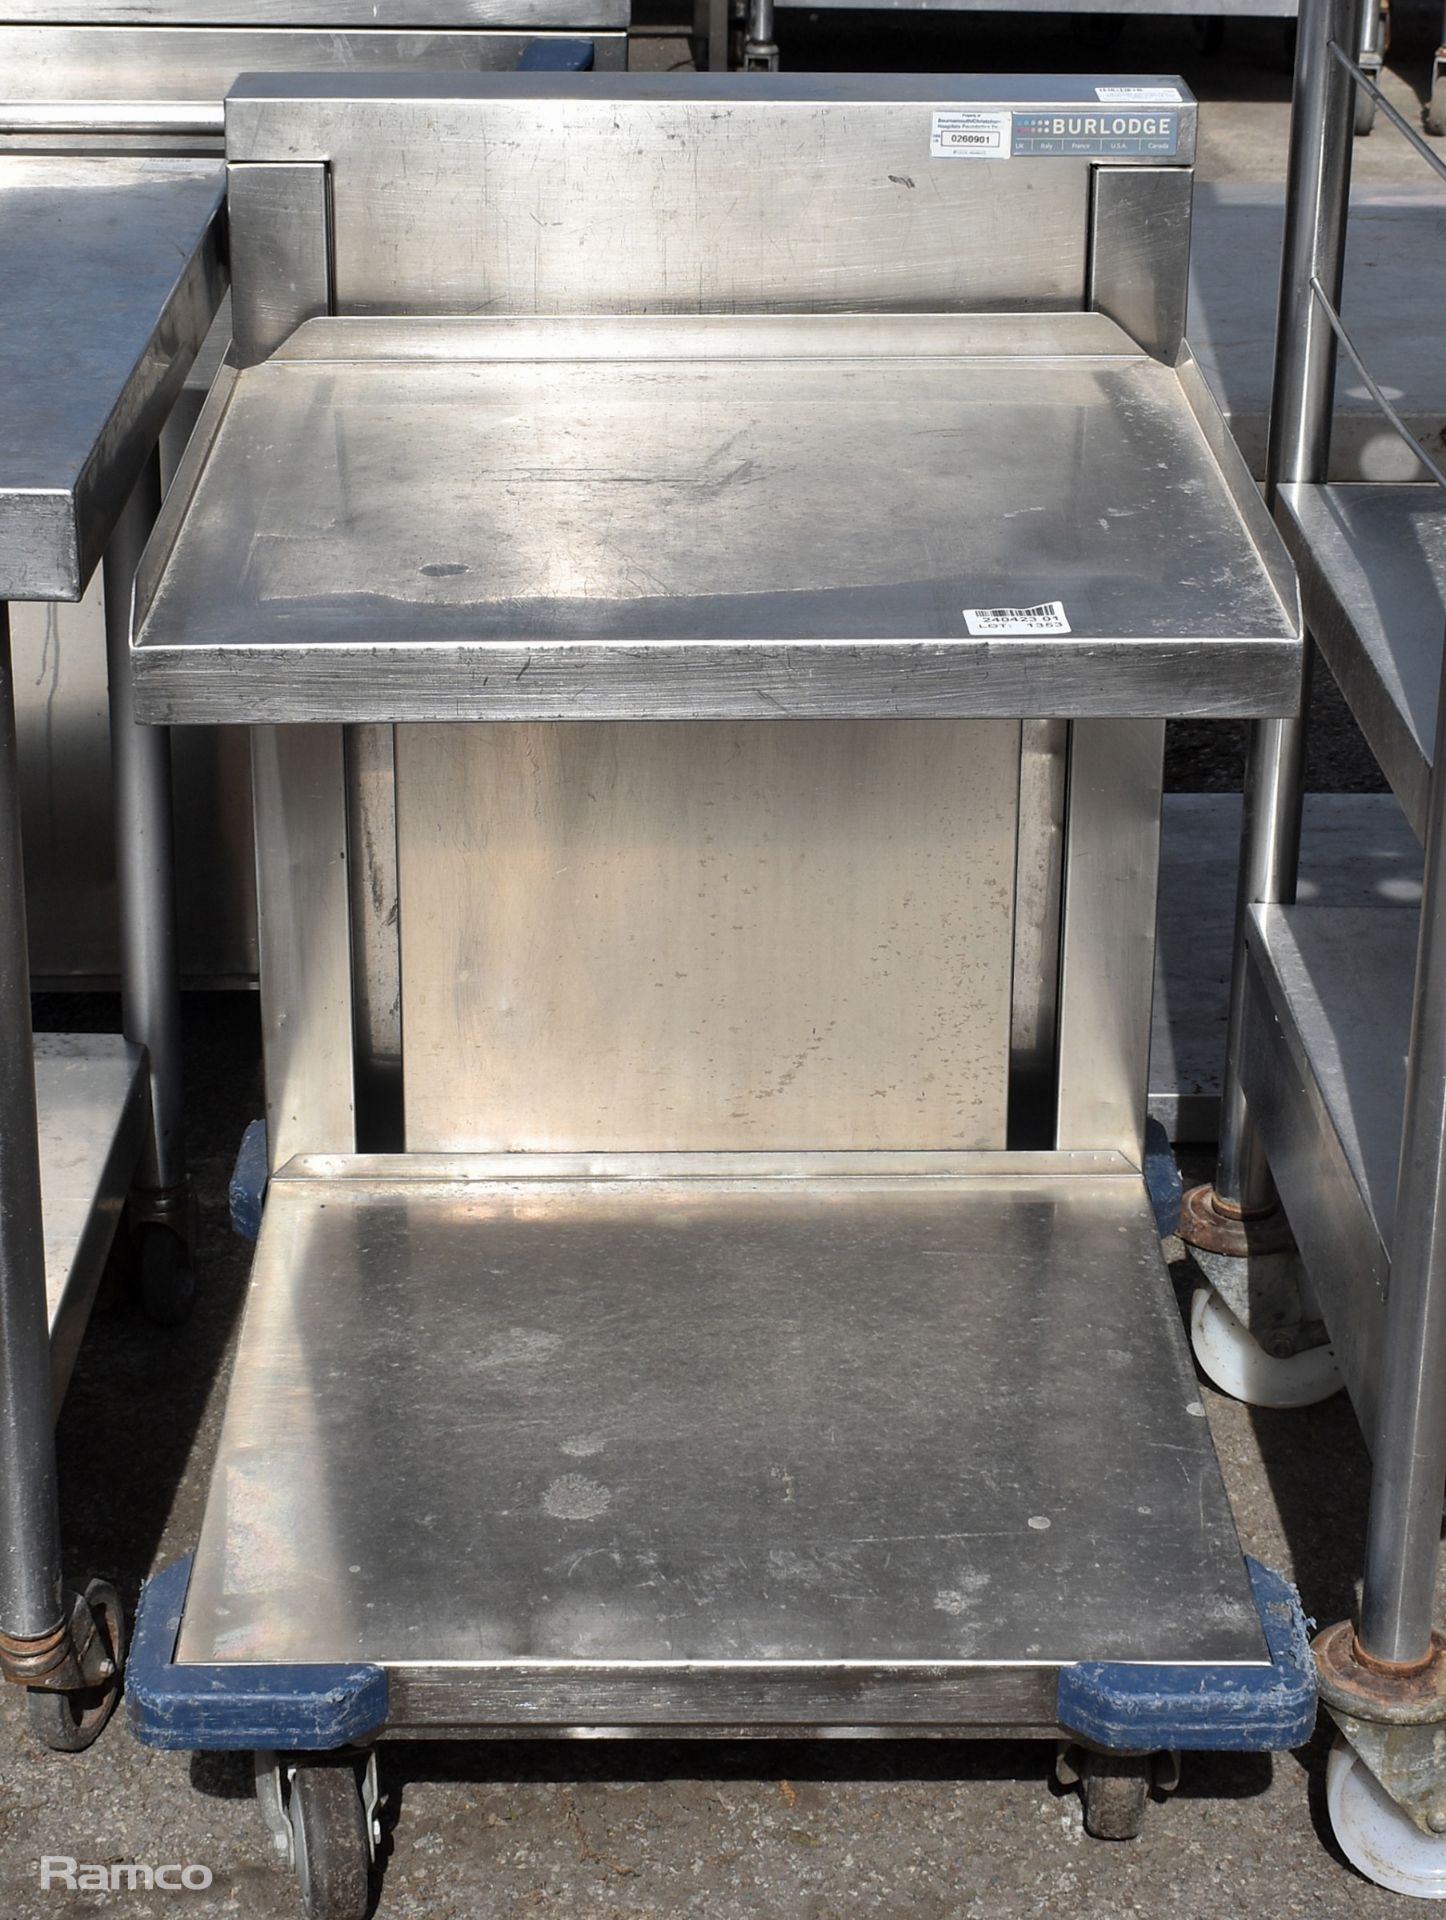 Burlodge stainless steel adjustable self-levelling tray trolley - W 650 x D 770 x H 935mm